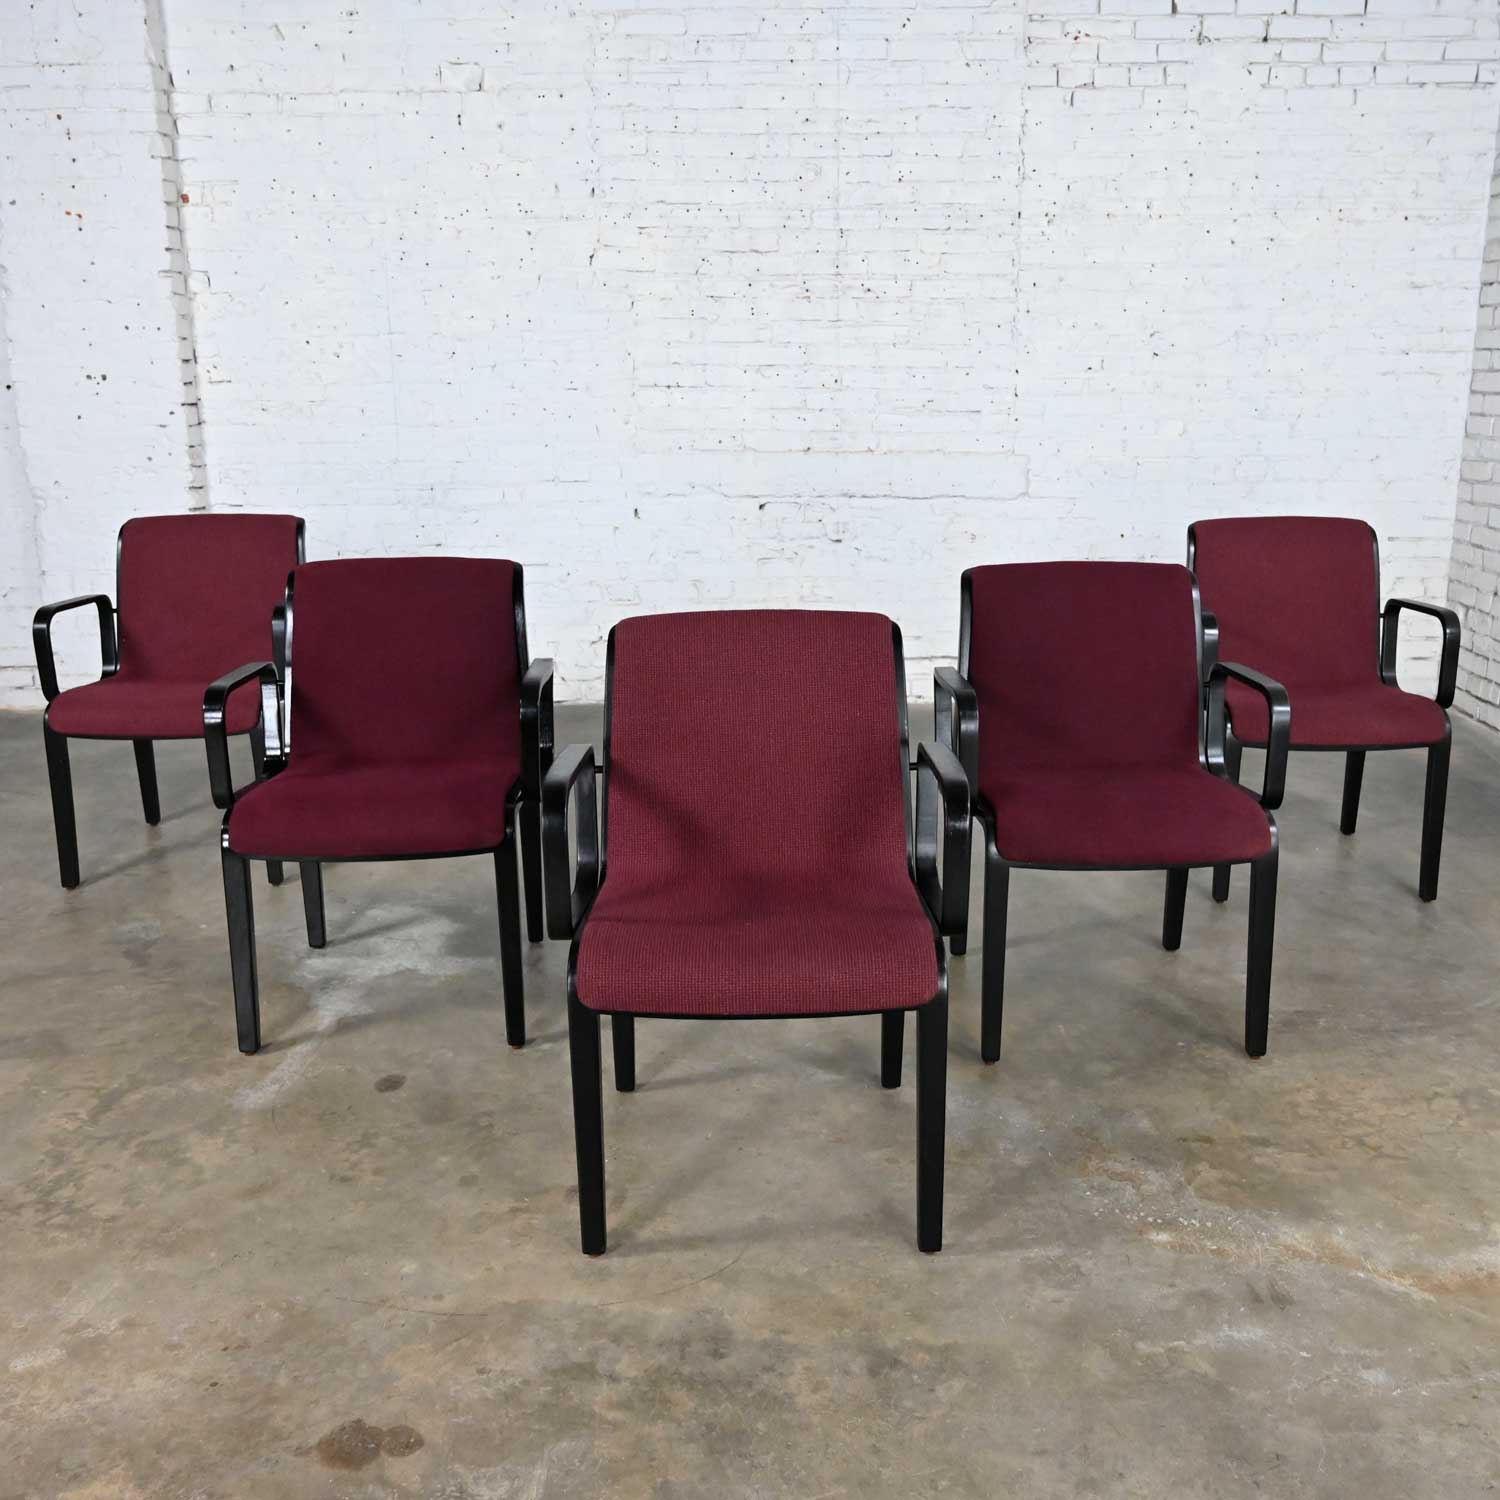 Wonderful vintage MCM or Mid-Century Modern bentwood 1300 Series dining armchairs with original maroon hopsacking upholstery and newly ebonized frames by Bill Stephens for Knoll set of 5. Beautiful condition, keeping in mind that these are vintage